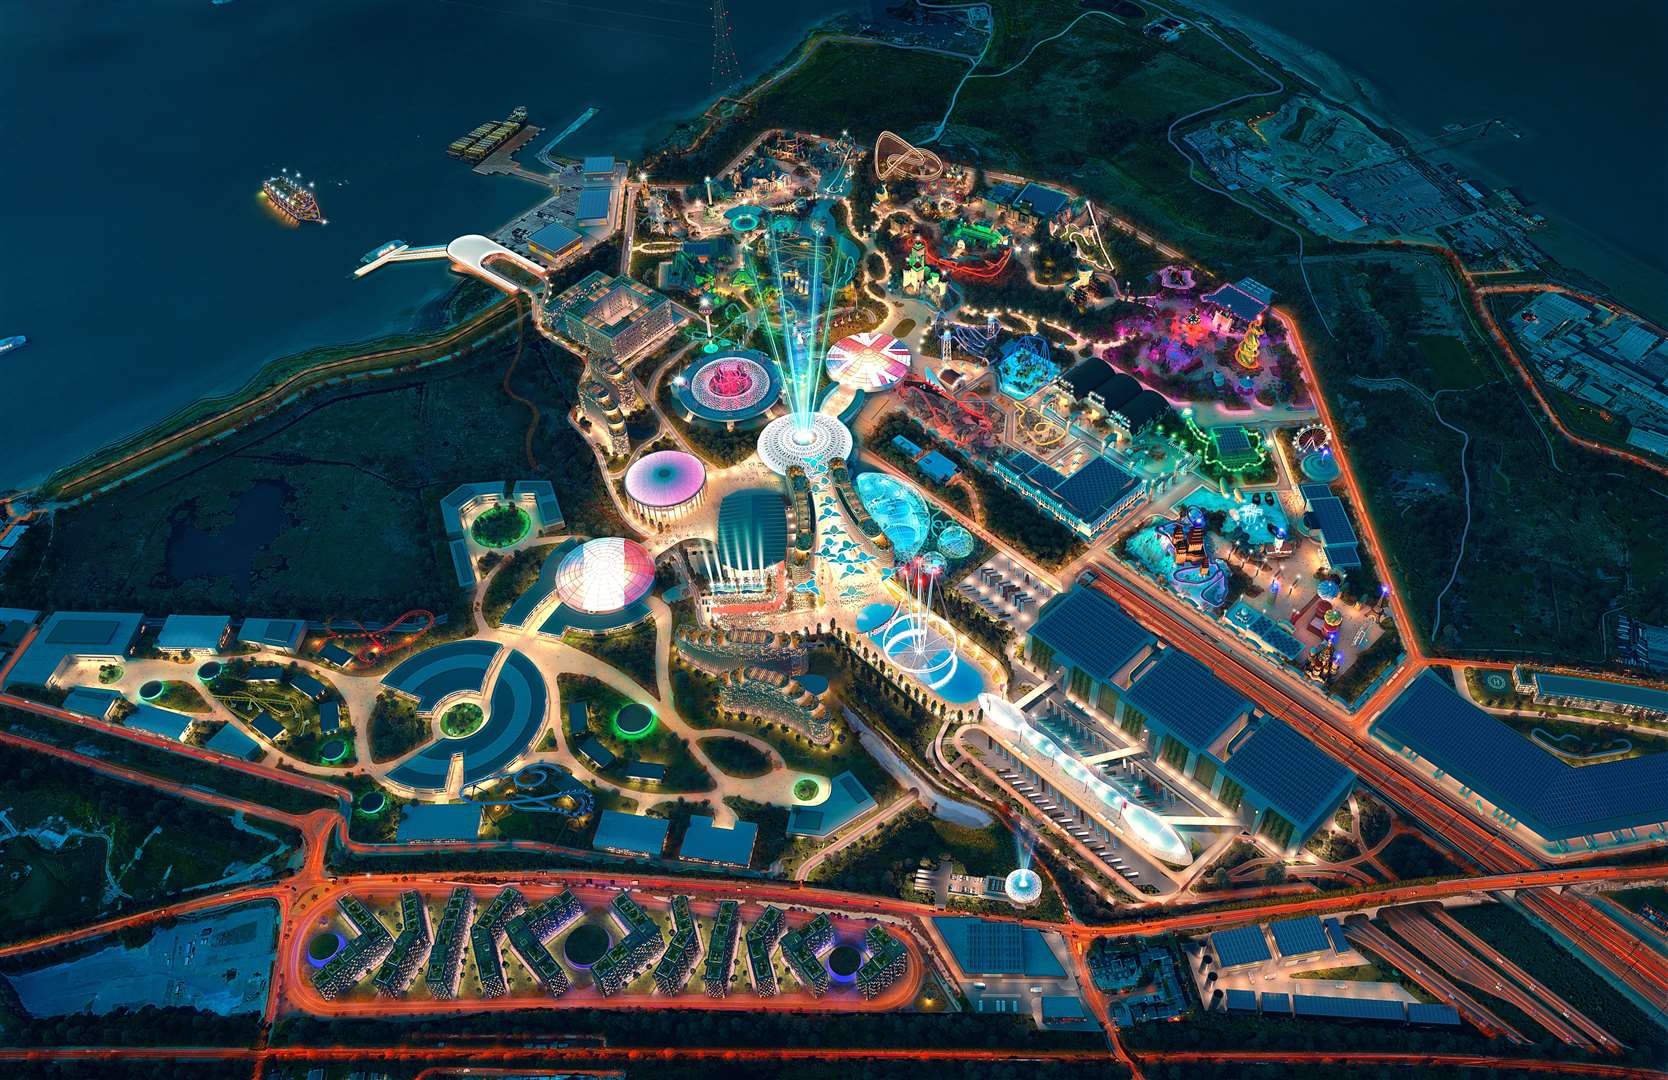 A new aerial night time image of the London Resort theme park project has been released. Photo: London Resort